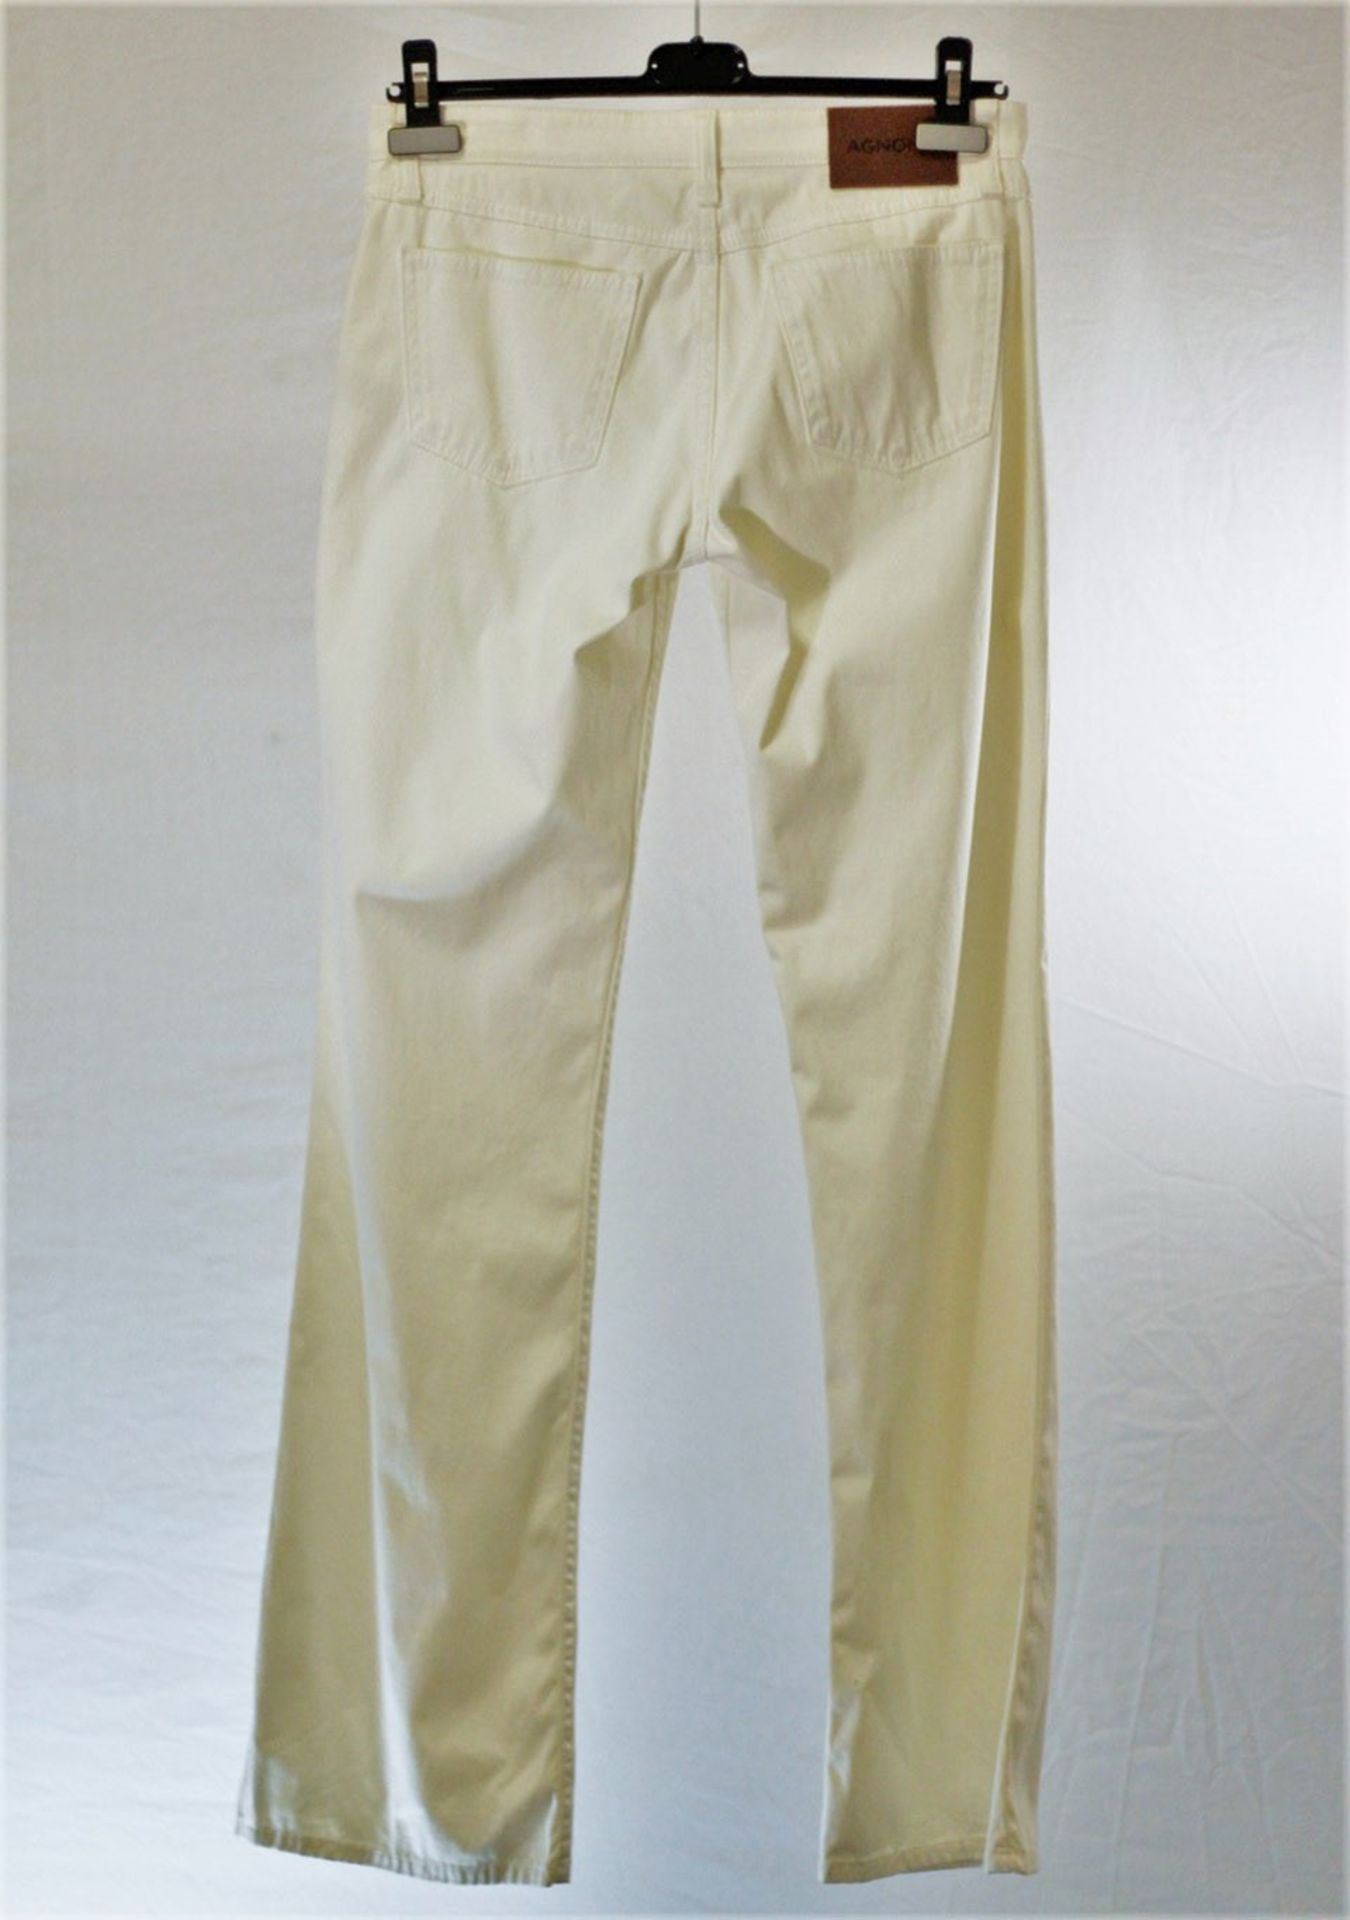 1 x Agnona Cream Jeans - Size: 14 - Material: 98% Cotton, 2% Elastane. Lining 100% Cotton - From a - Image 3 of 6